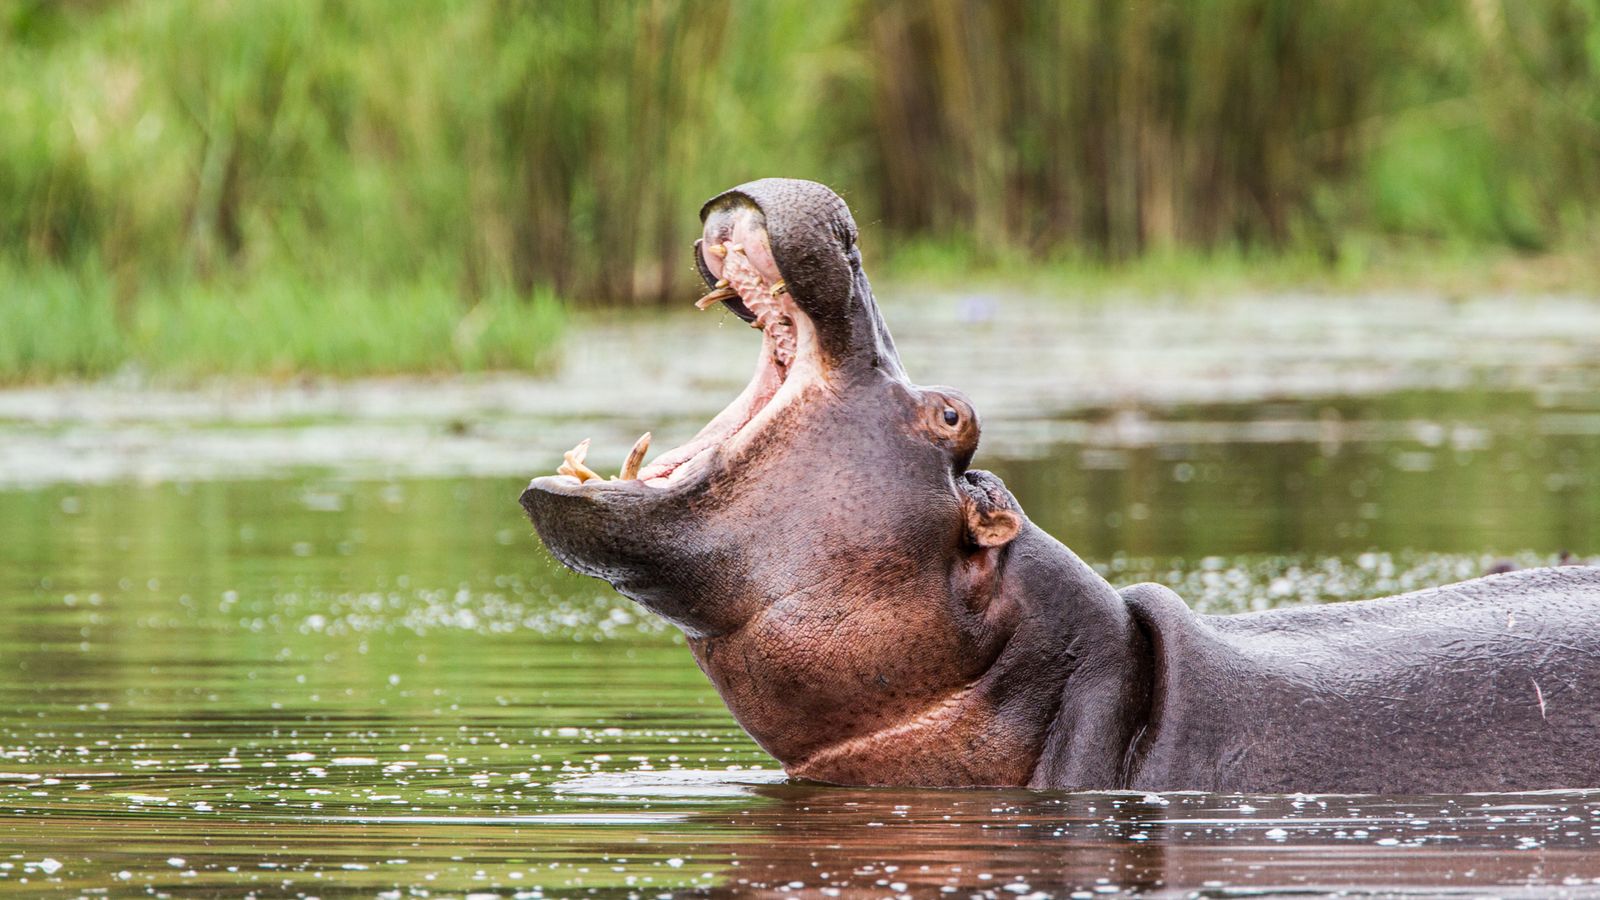 Child killed after hippo capsizes canoe in Malawi - 23 other people feared dead